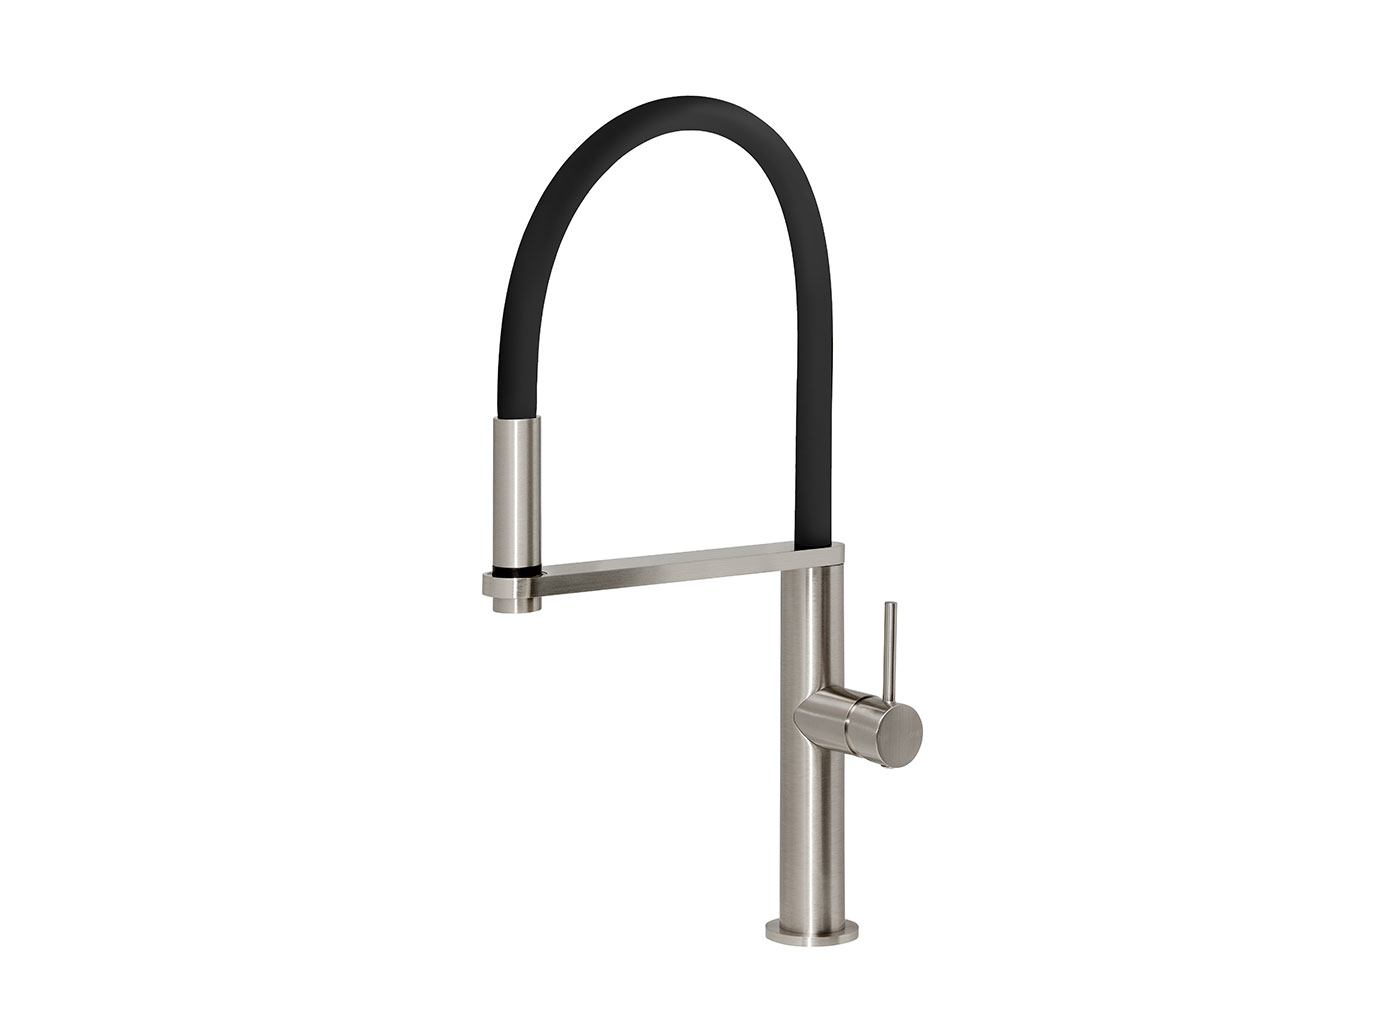 - Quality brass construction with a superior chrome finish